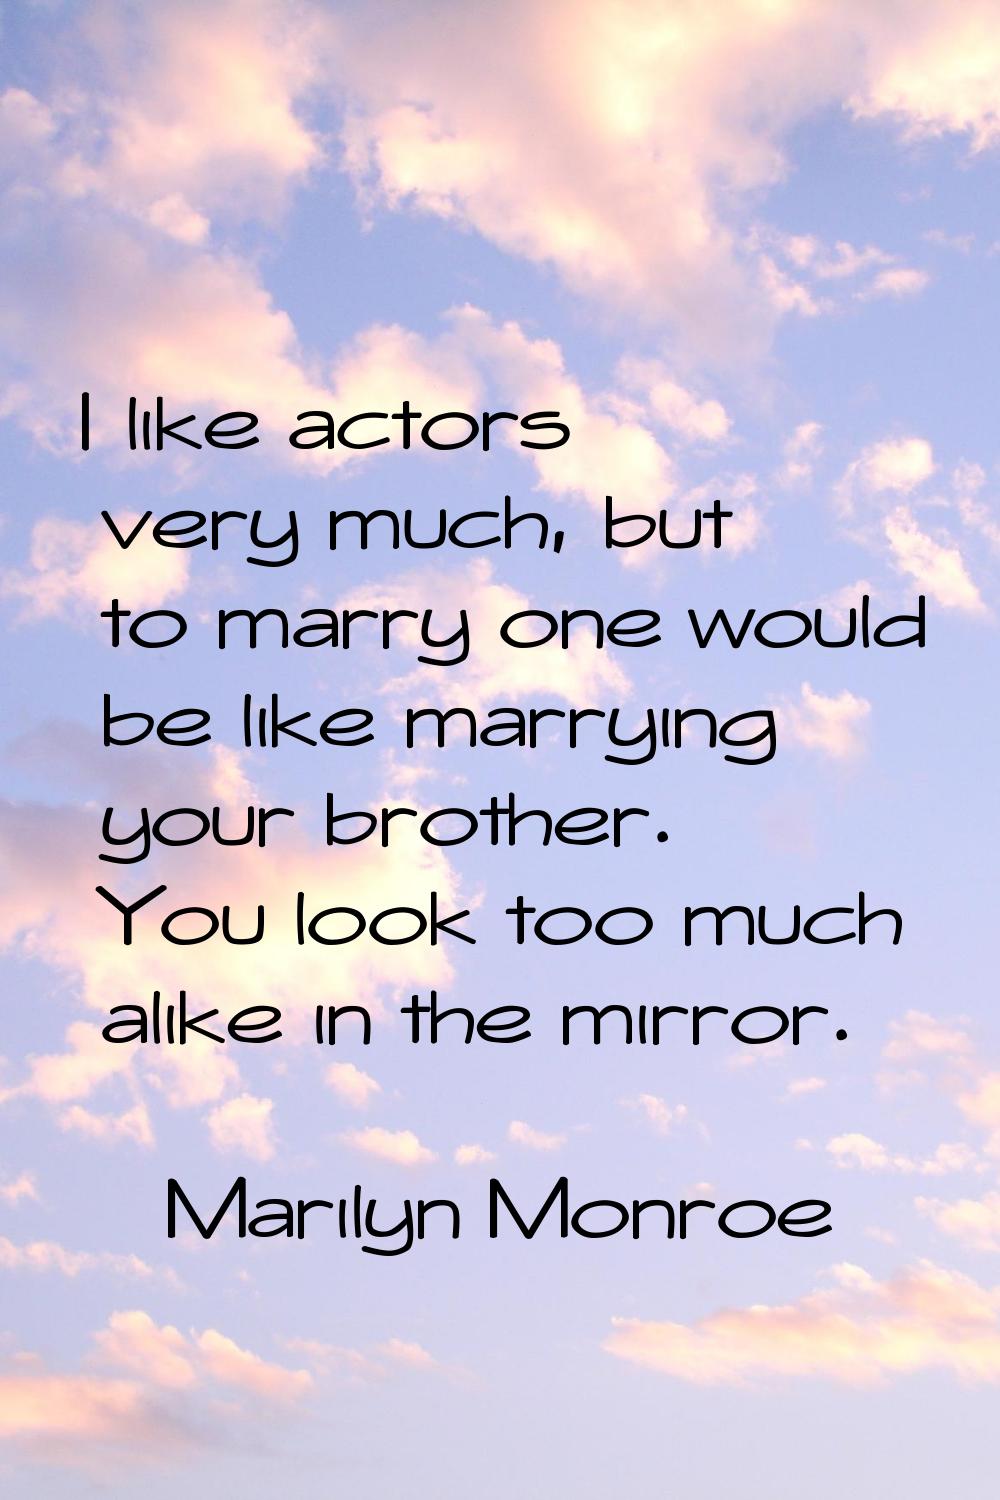 I like actors very much, but to marry one would be like marrying your brother. You look too much al